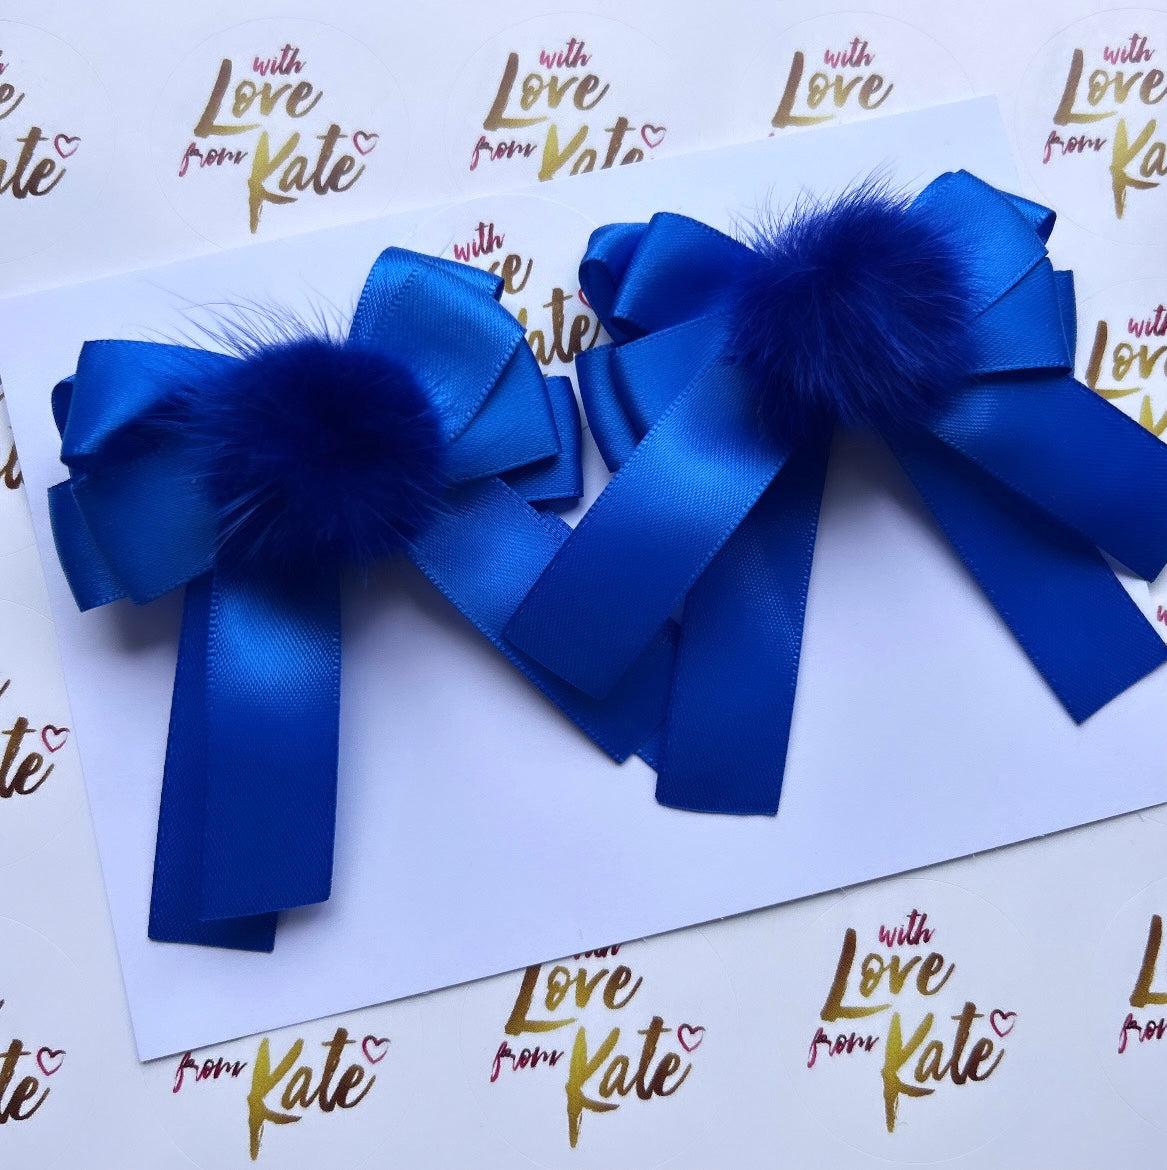 2 x Royal blue short tail bows with Pom poms